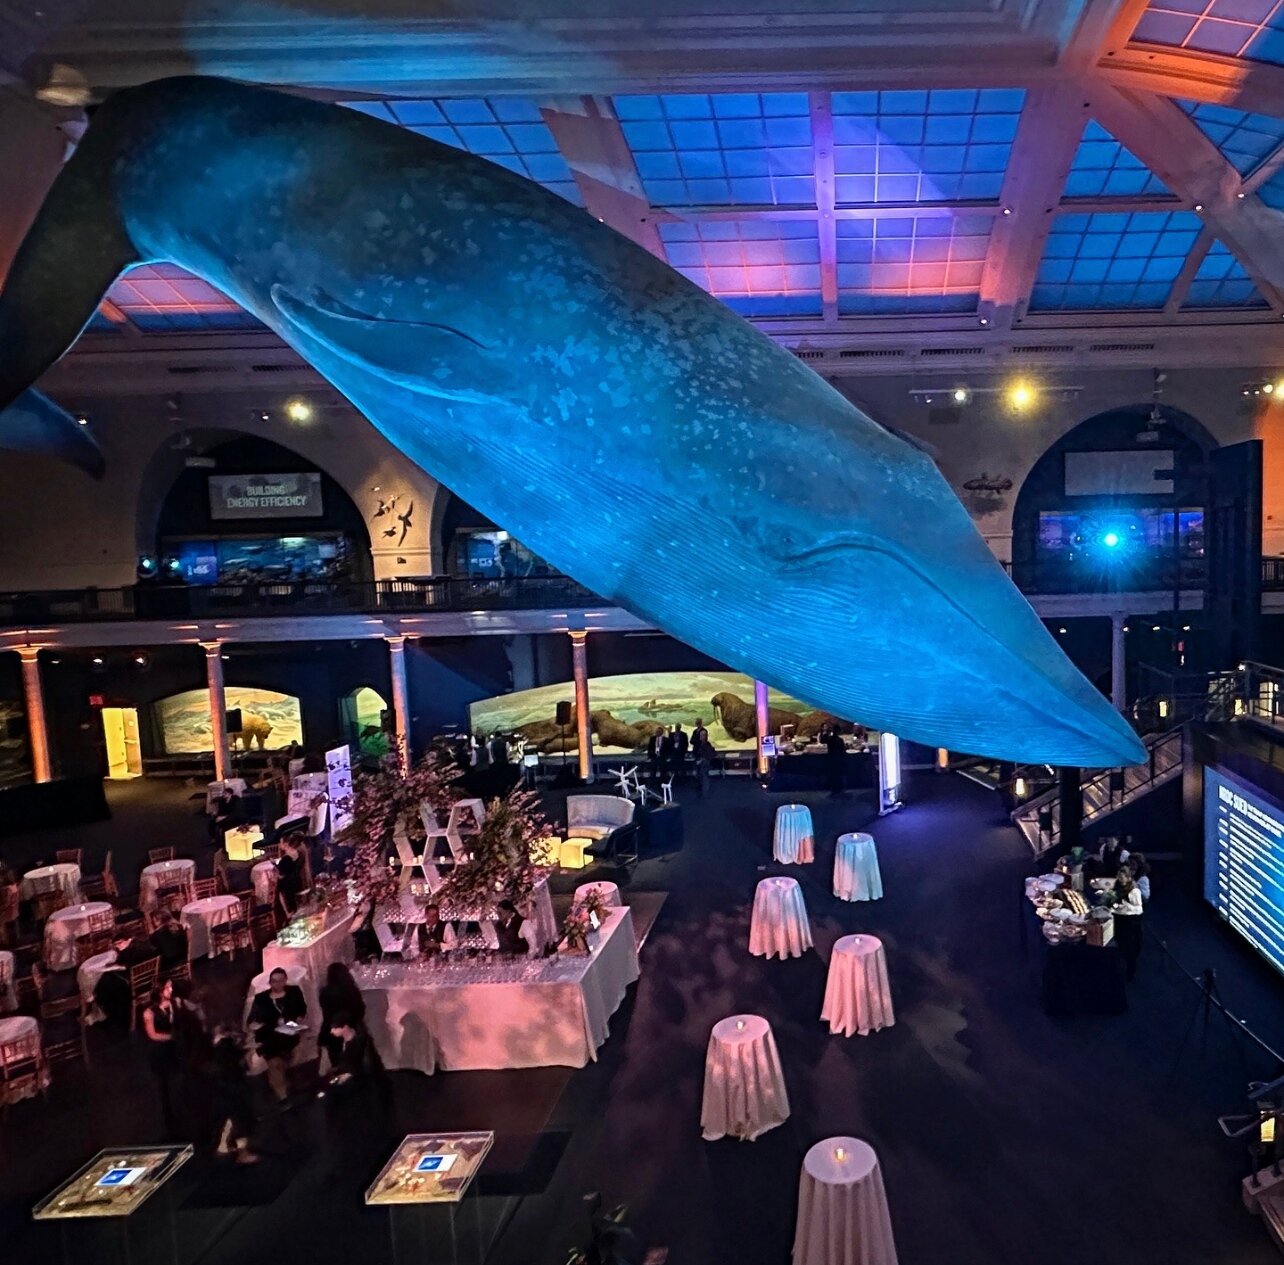 Gala fundraisers are a great way to contribute to a larger cause and we know how to make them unforgettable. Contact us today to get started!⁠
.⁠
.⁠
.⁠
.⁠
#museumofnaturalhistory #museum #museumevents #gala #fundraiser #nyc #brandactivation #entertai